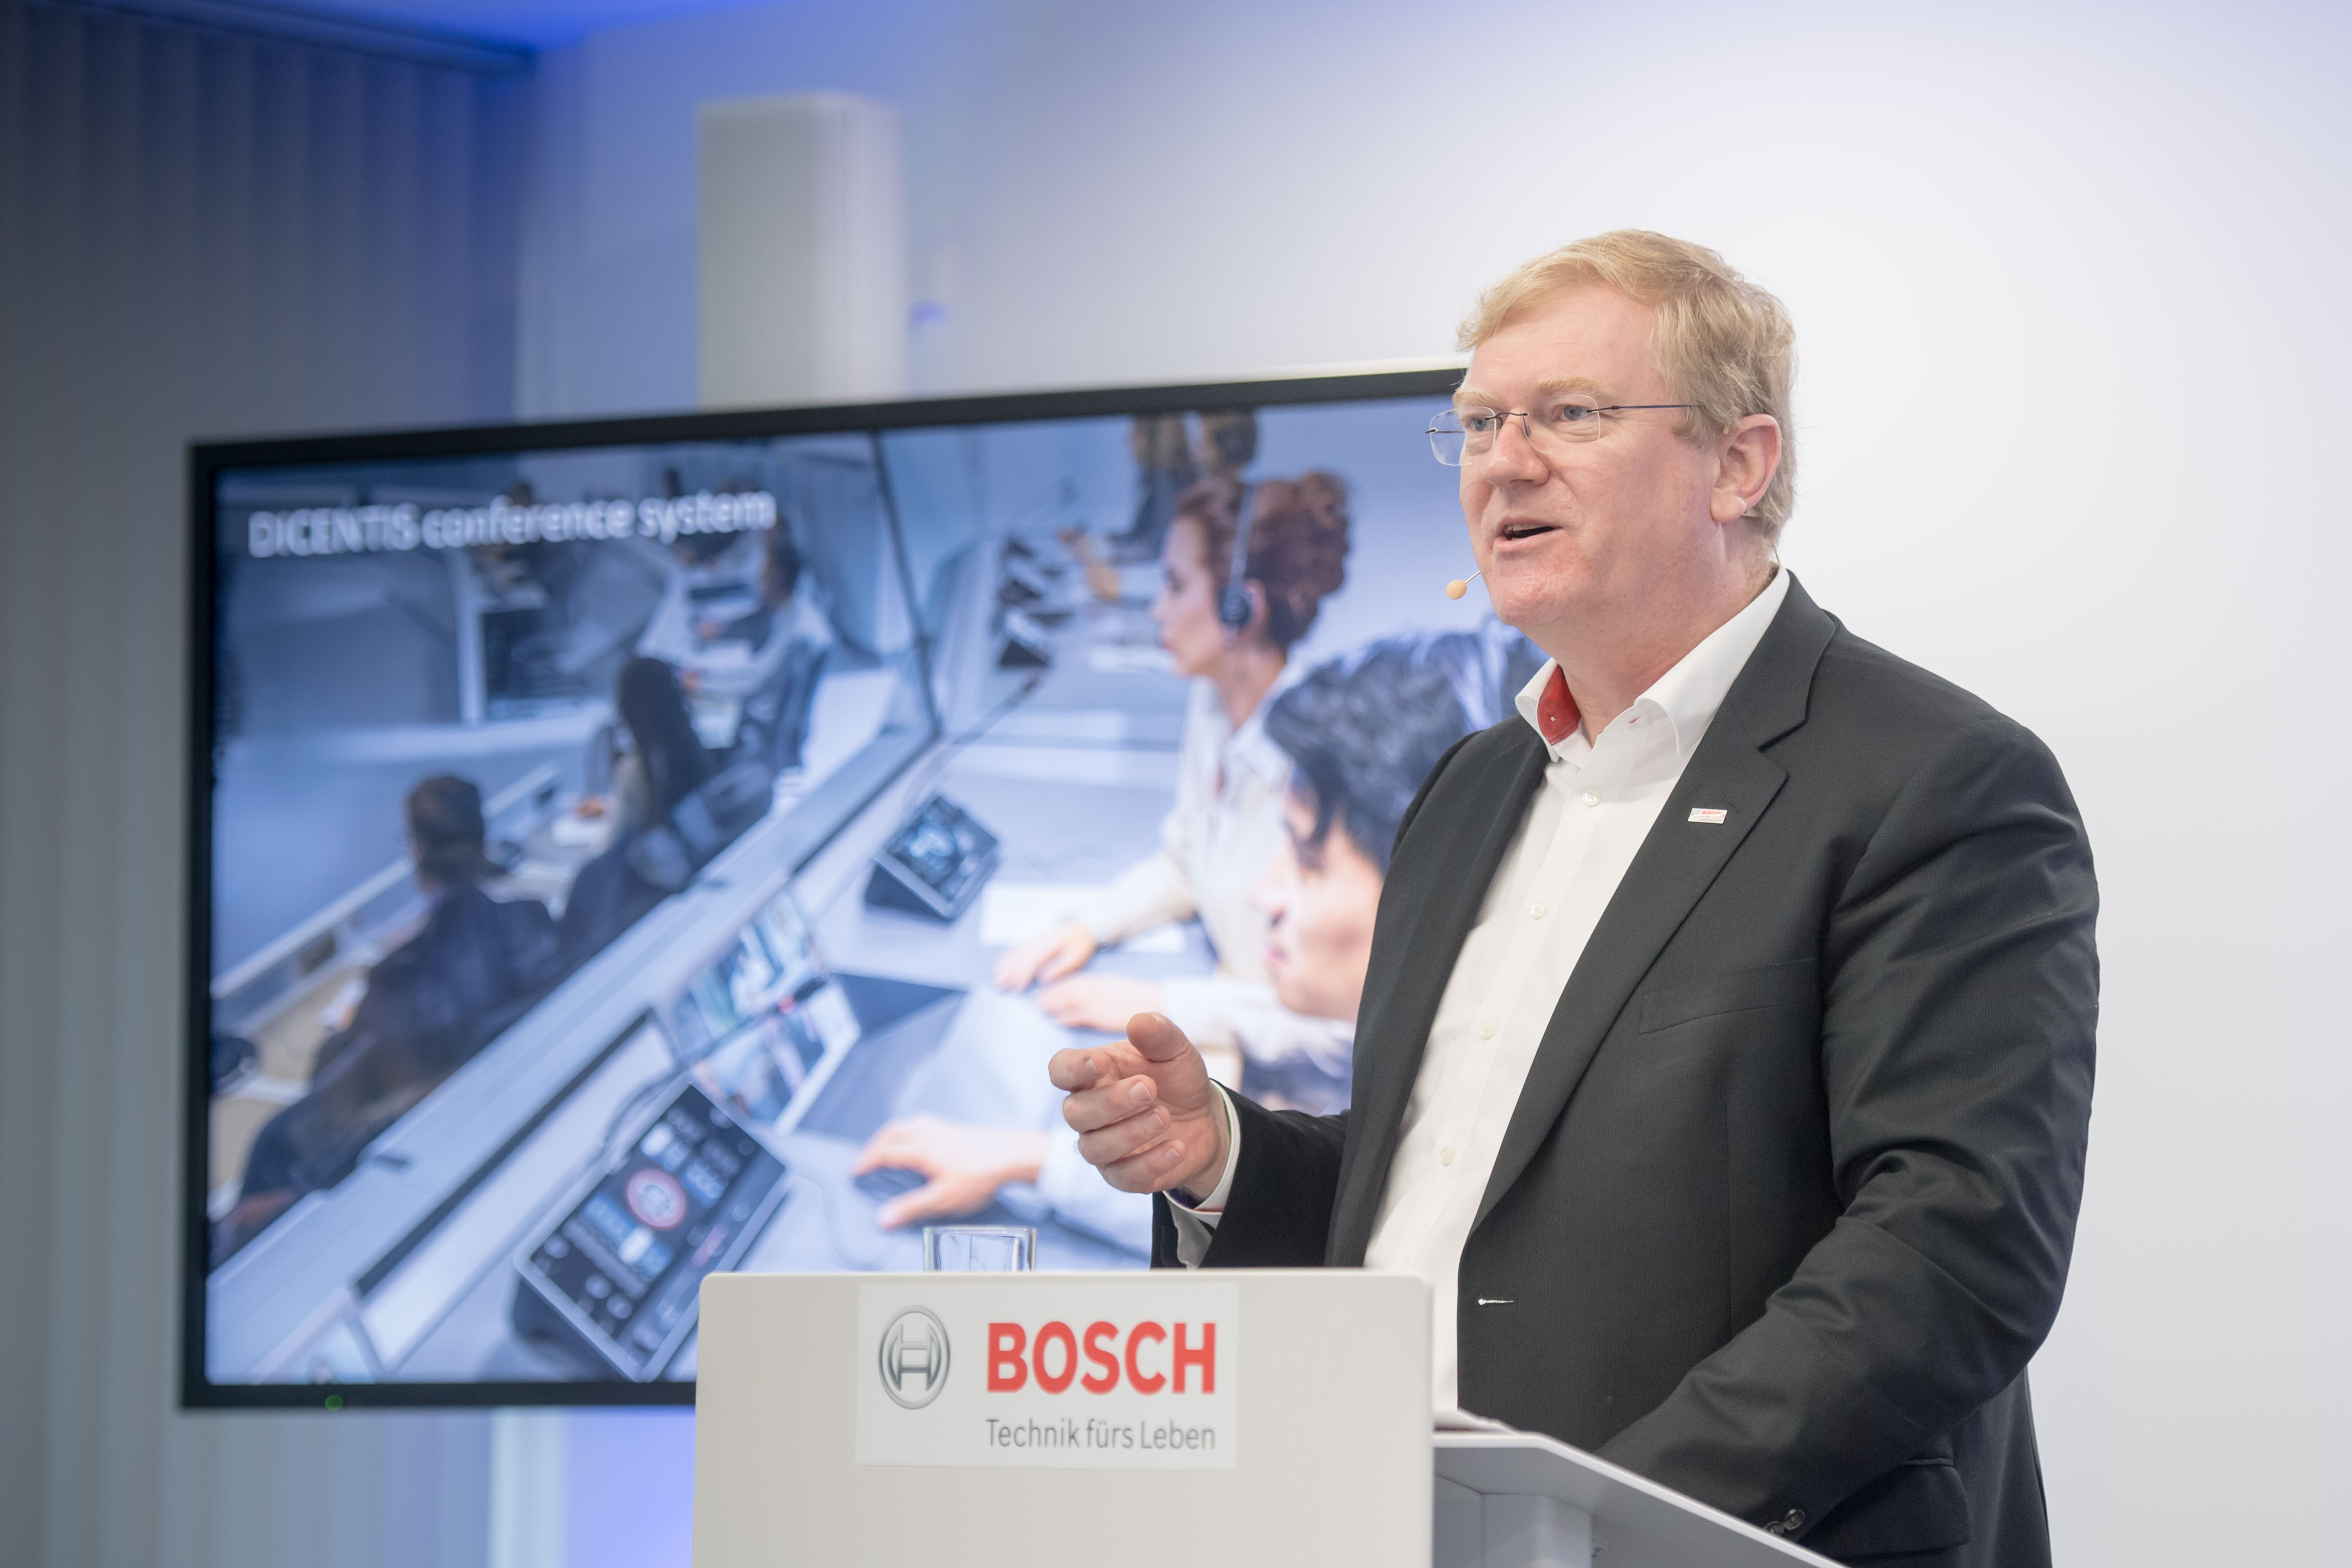 Dr. Stefan Hartung looking back on 2018 for the Bosch Energy and Building Technology business sector